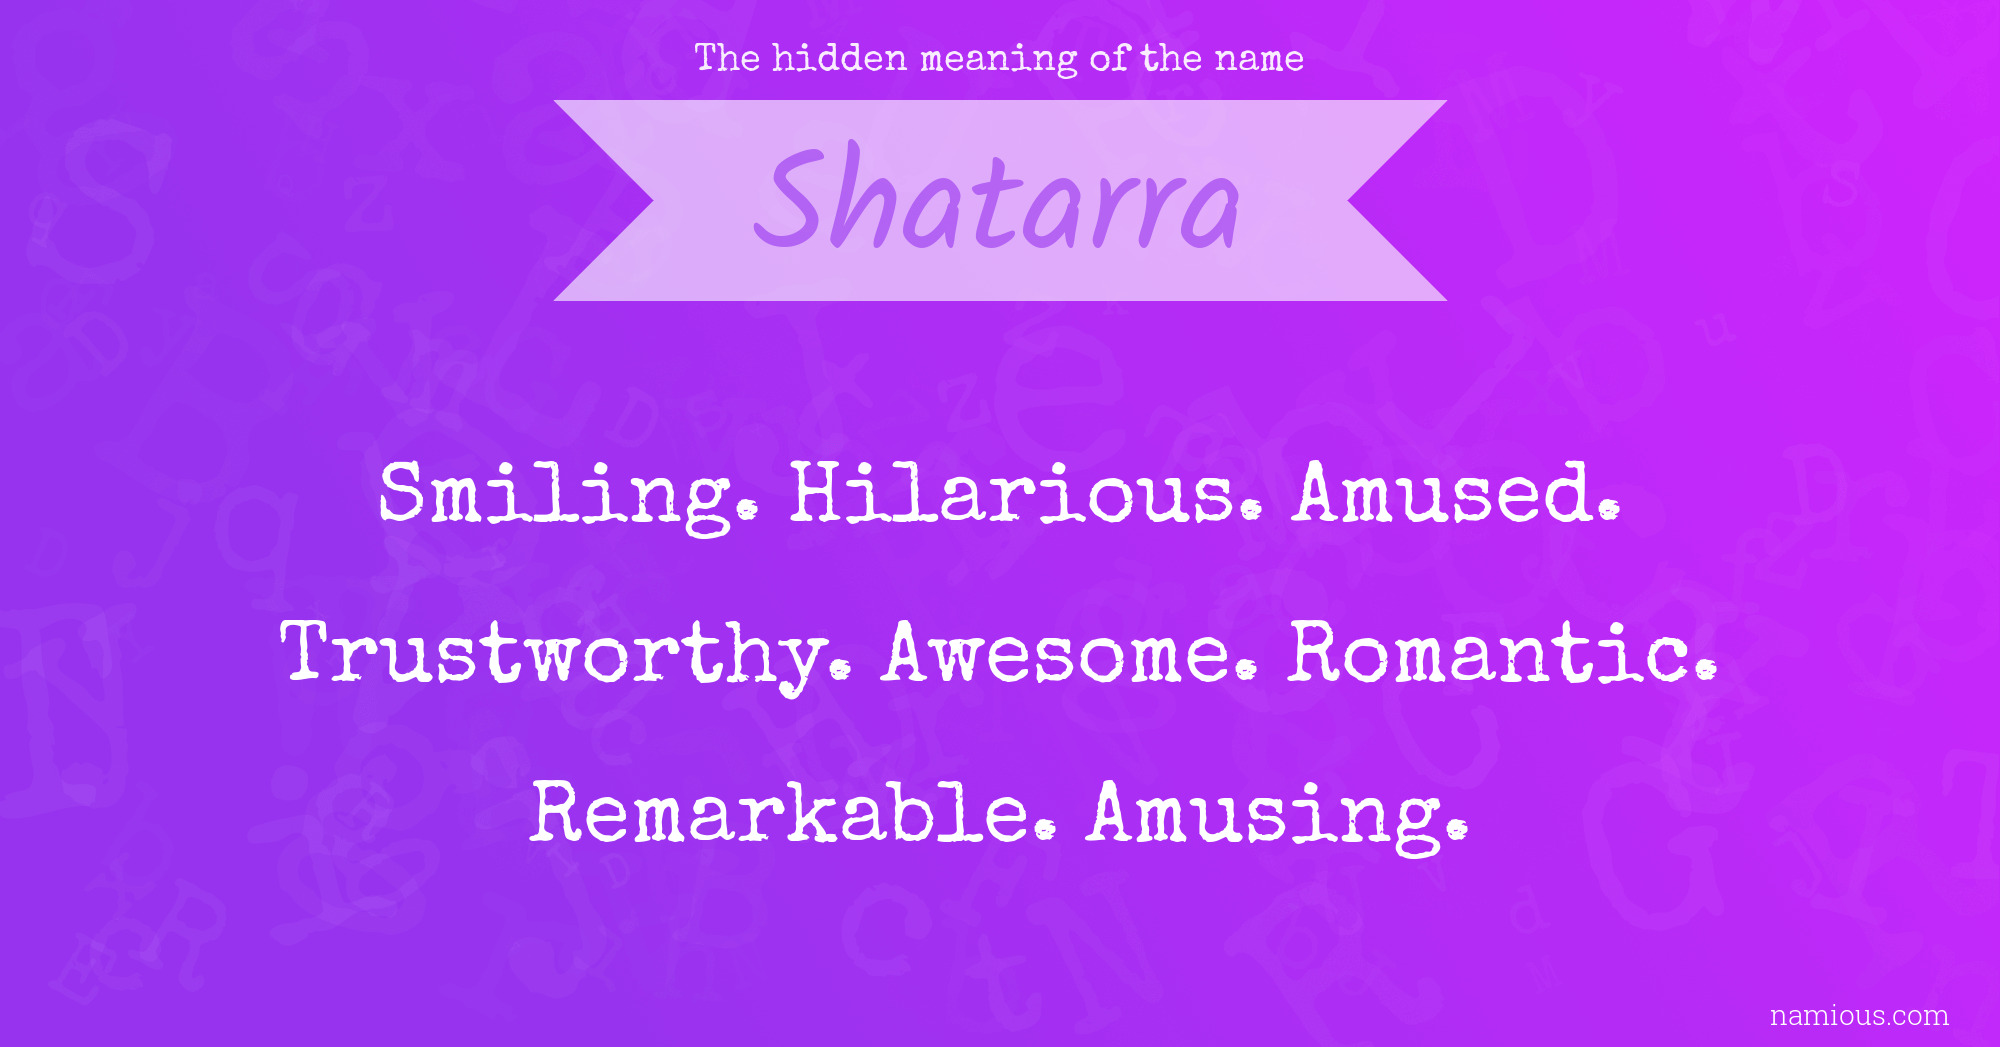 The hidden meaning of the name Shatarra